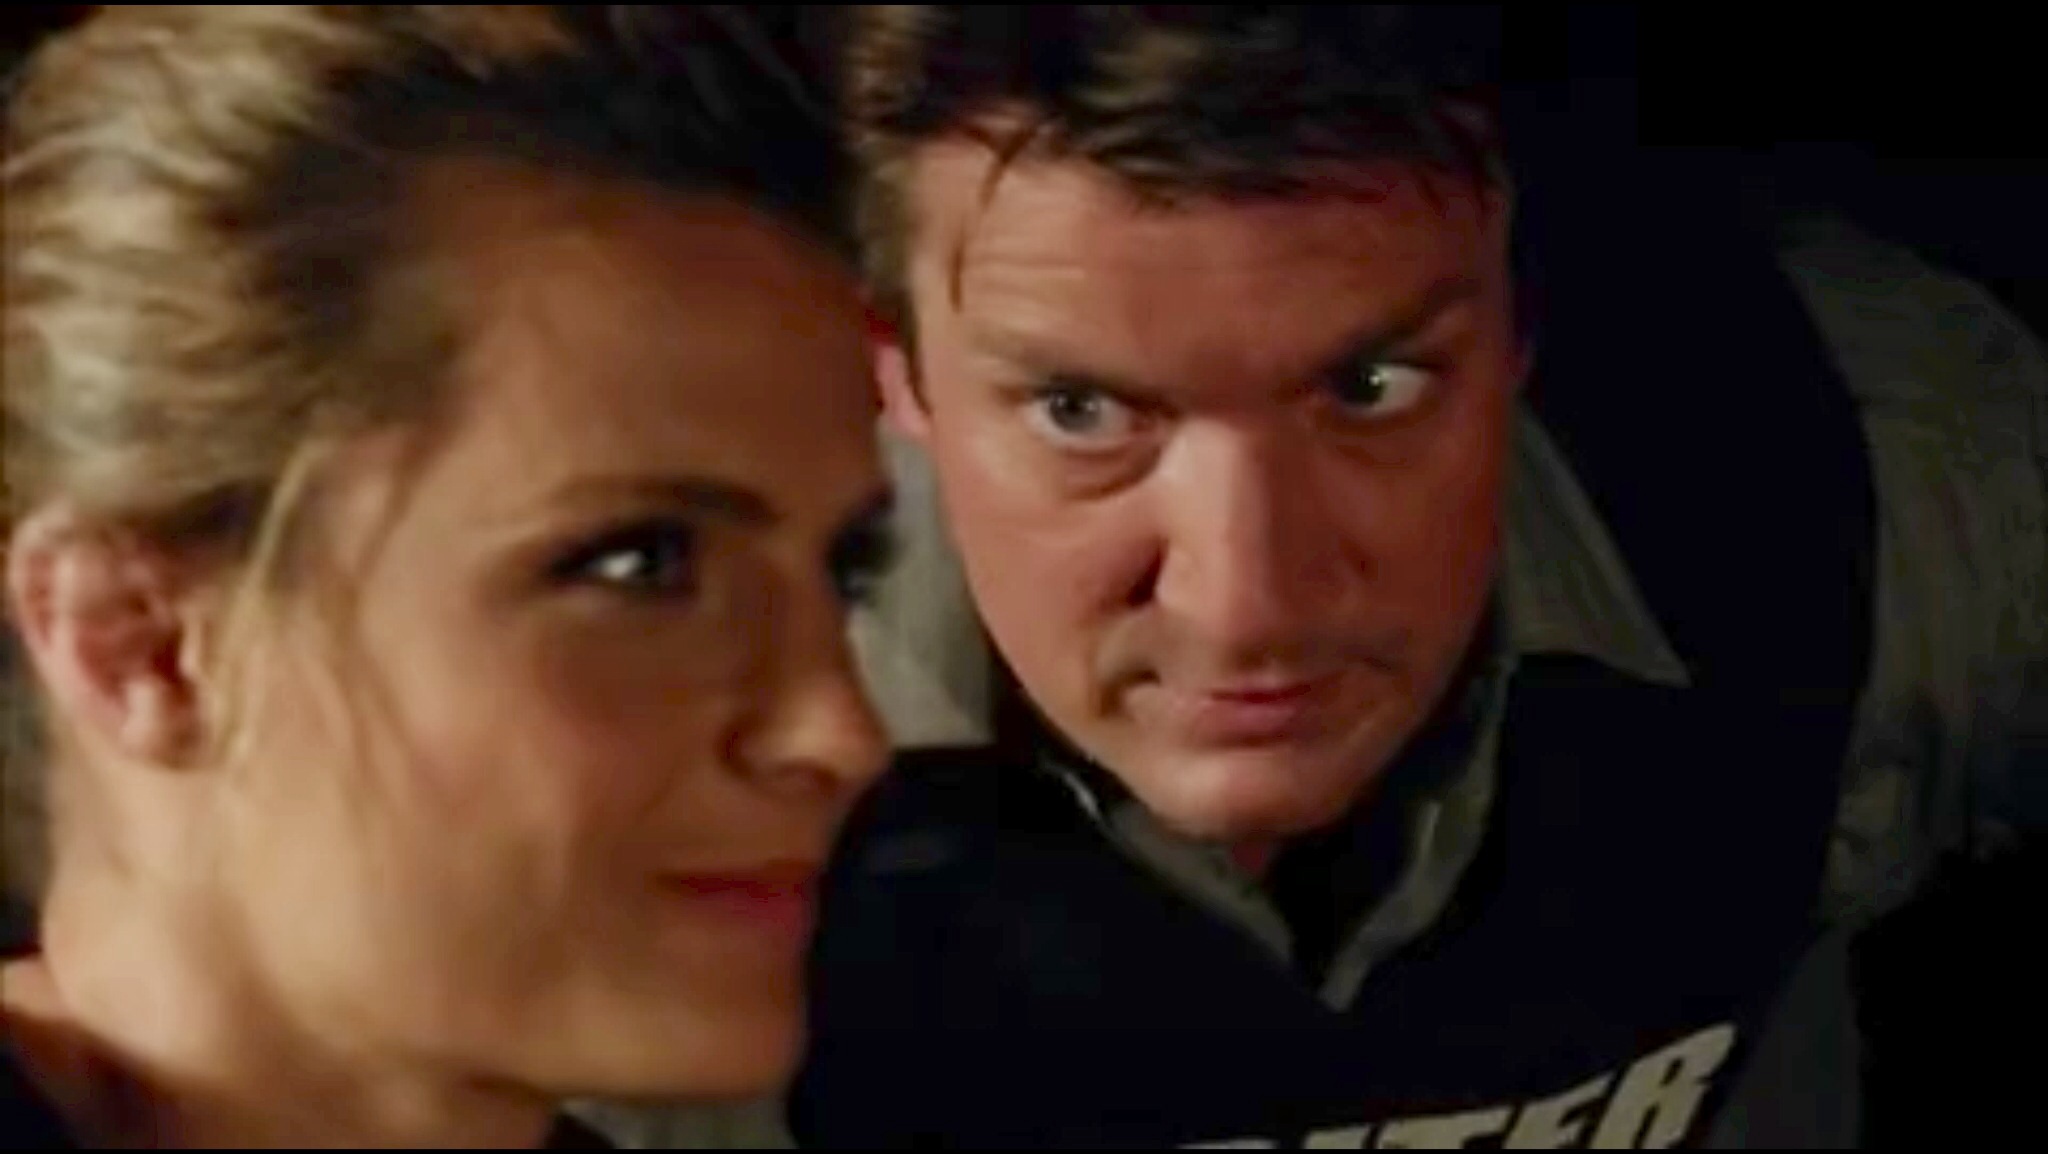 Review: 06.05. Castle’s “Time Will Tell” and Season 26 of Castle